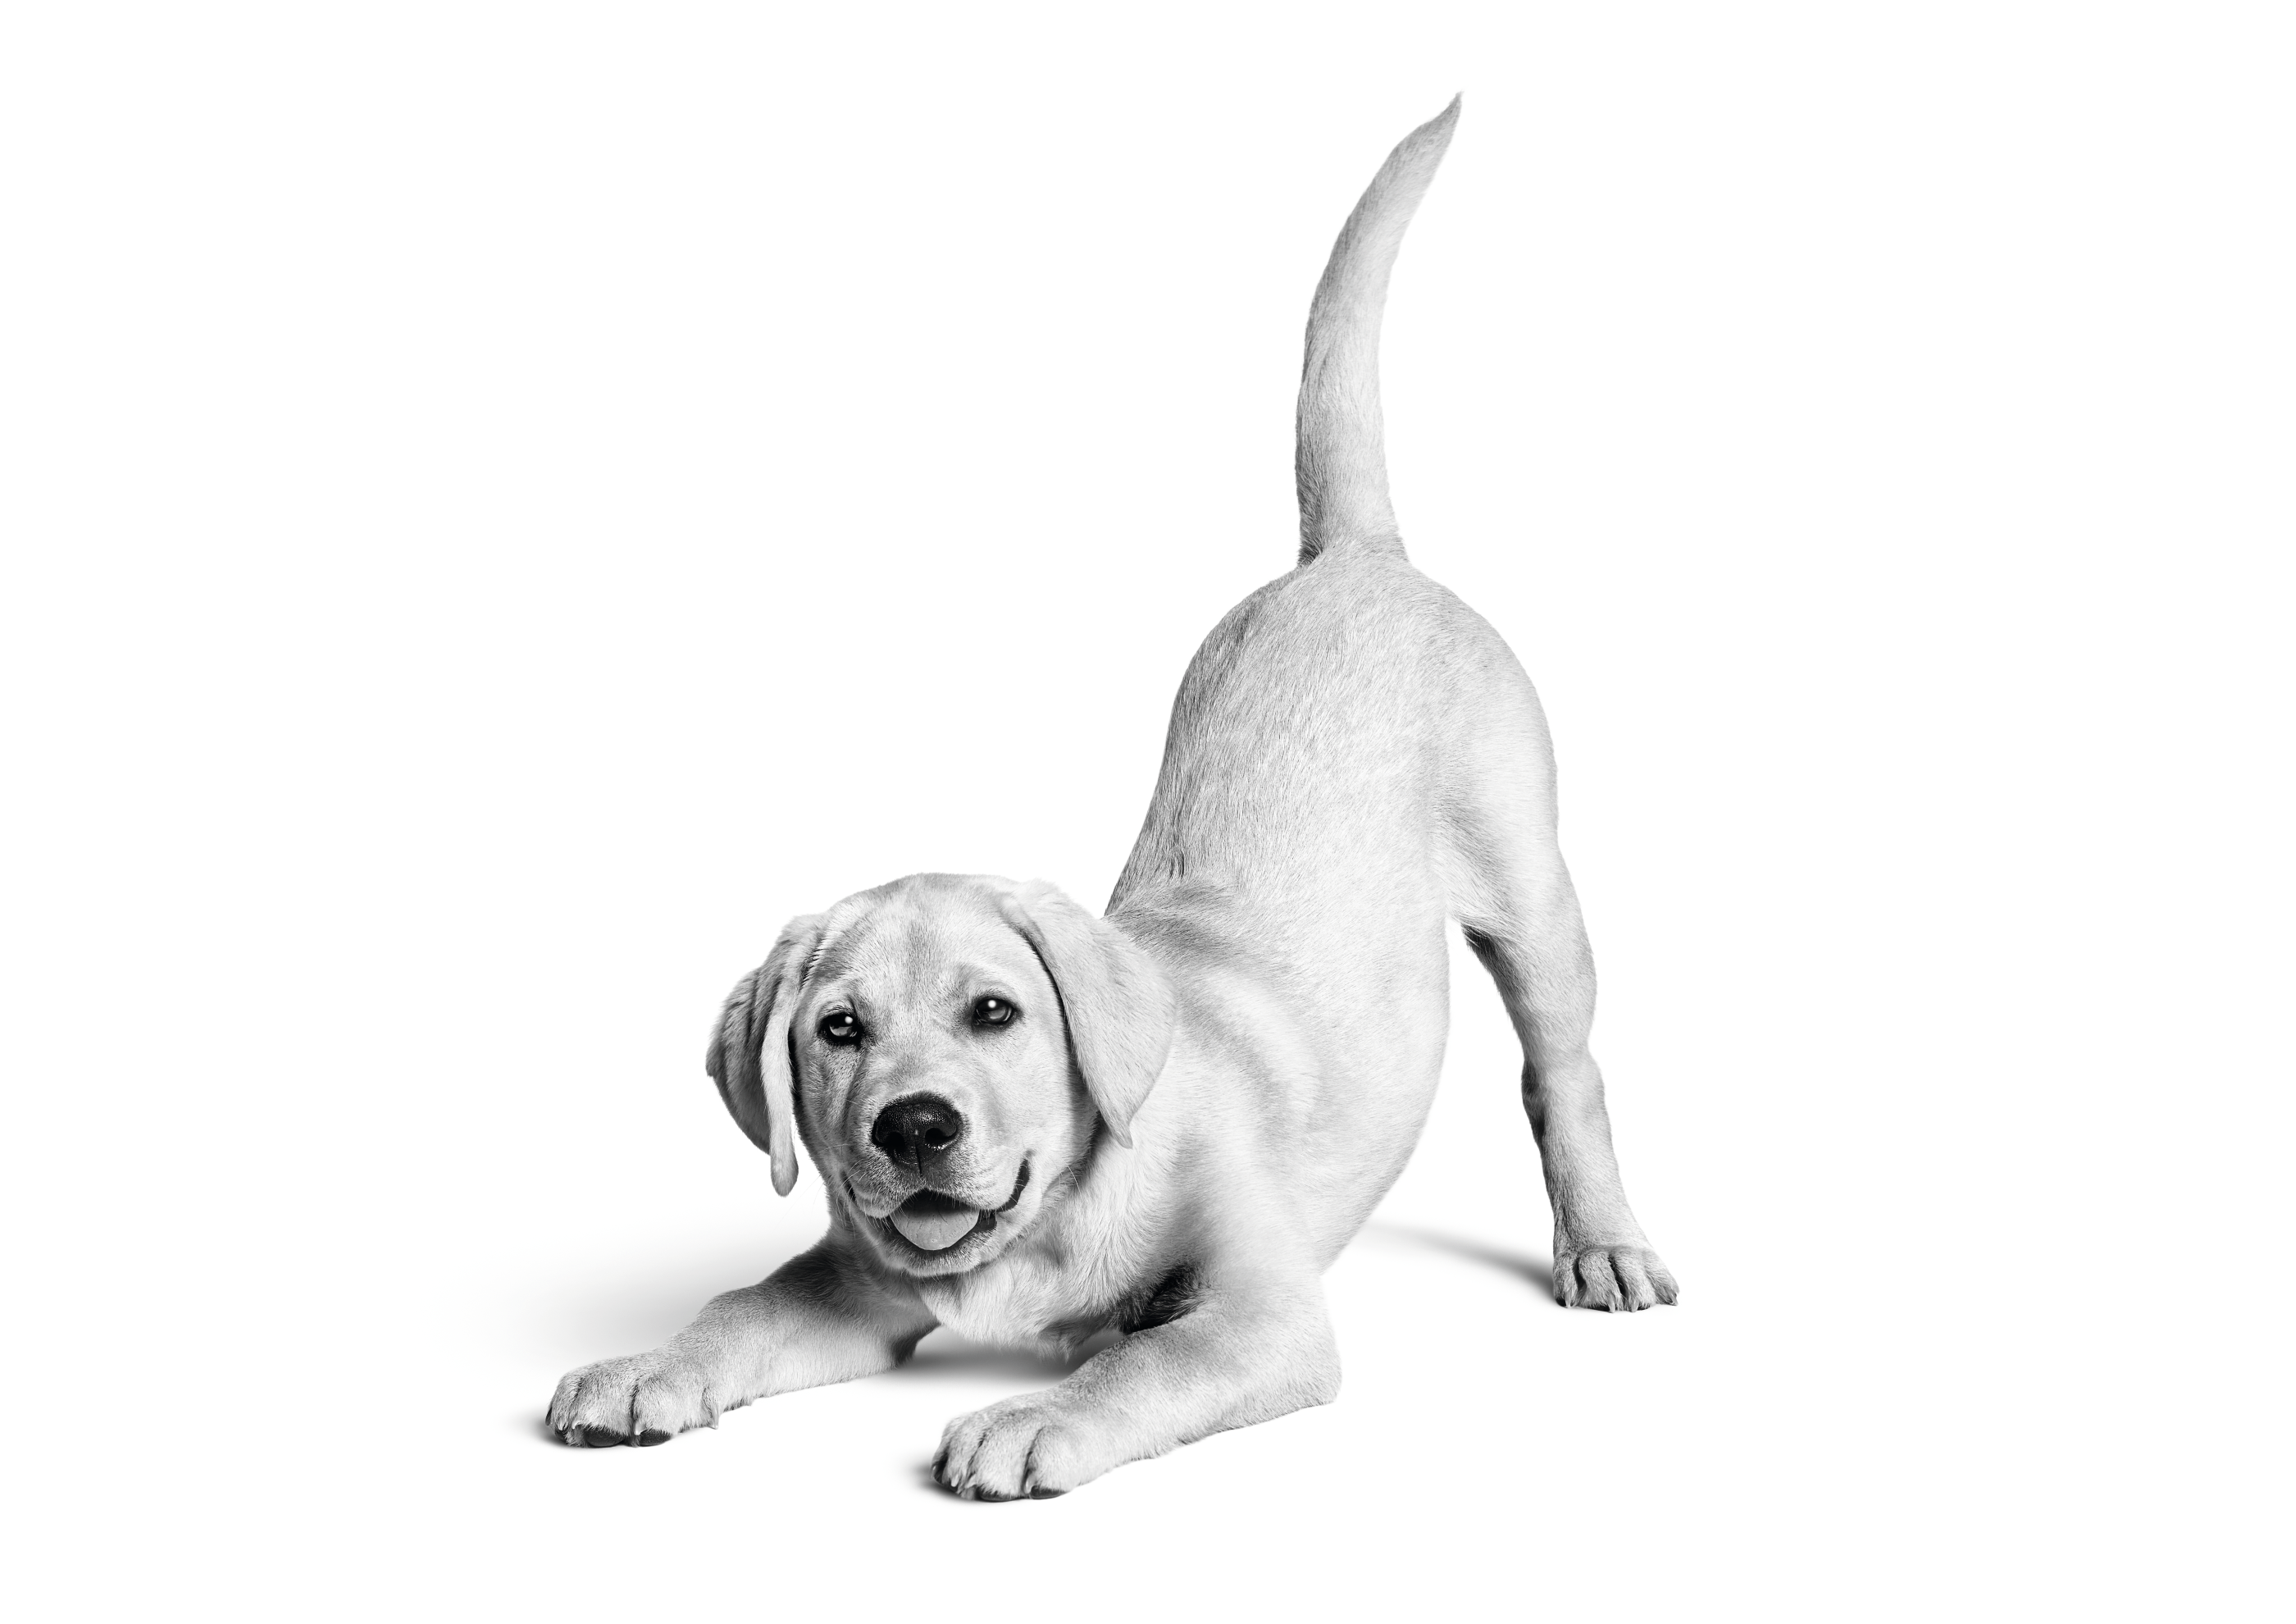 Labrador Retriever puppy in black and white playing